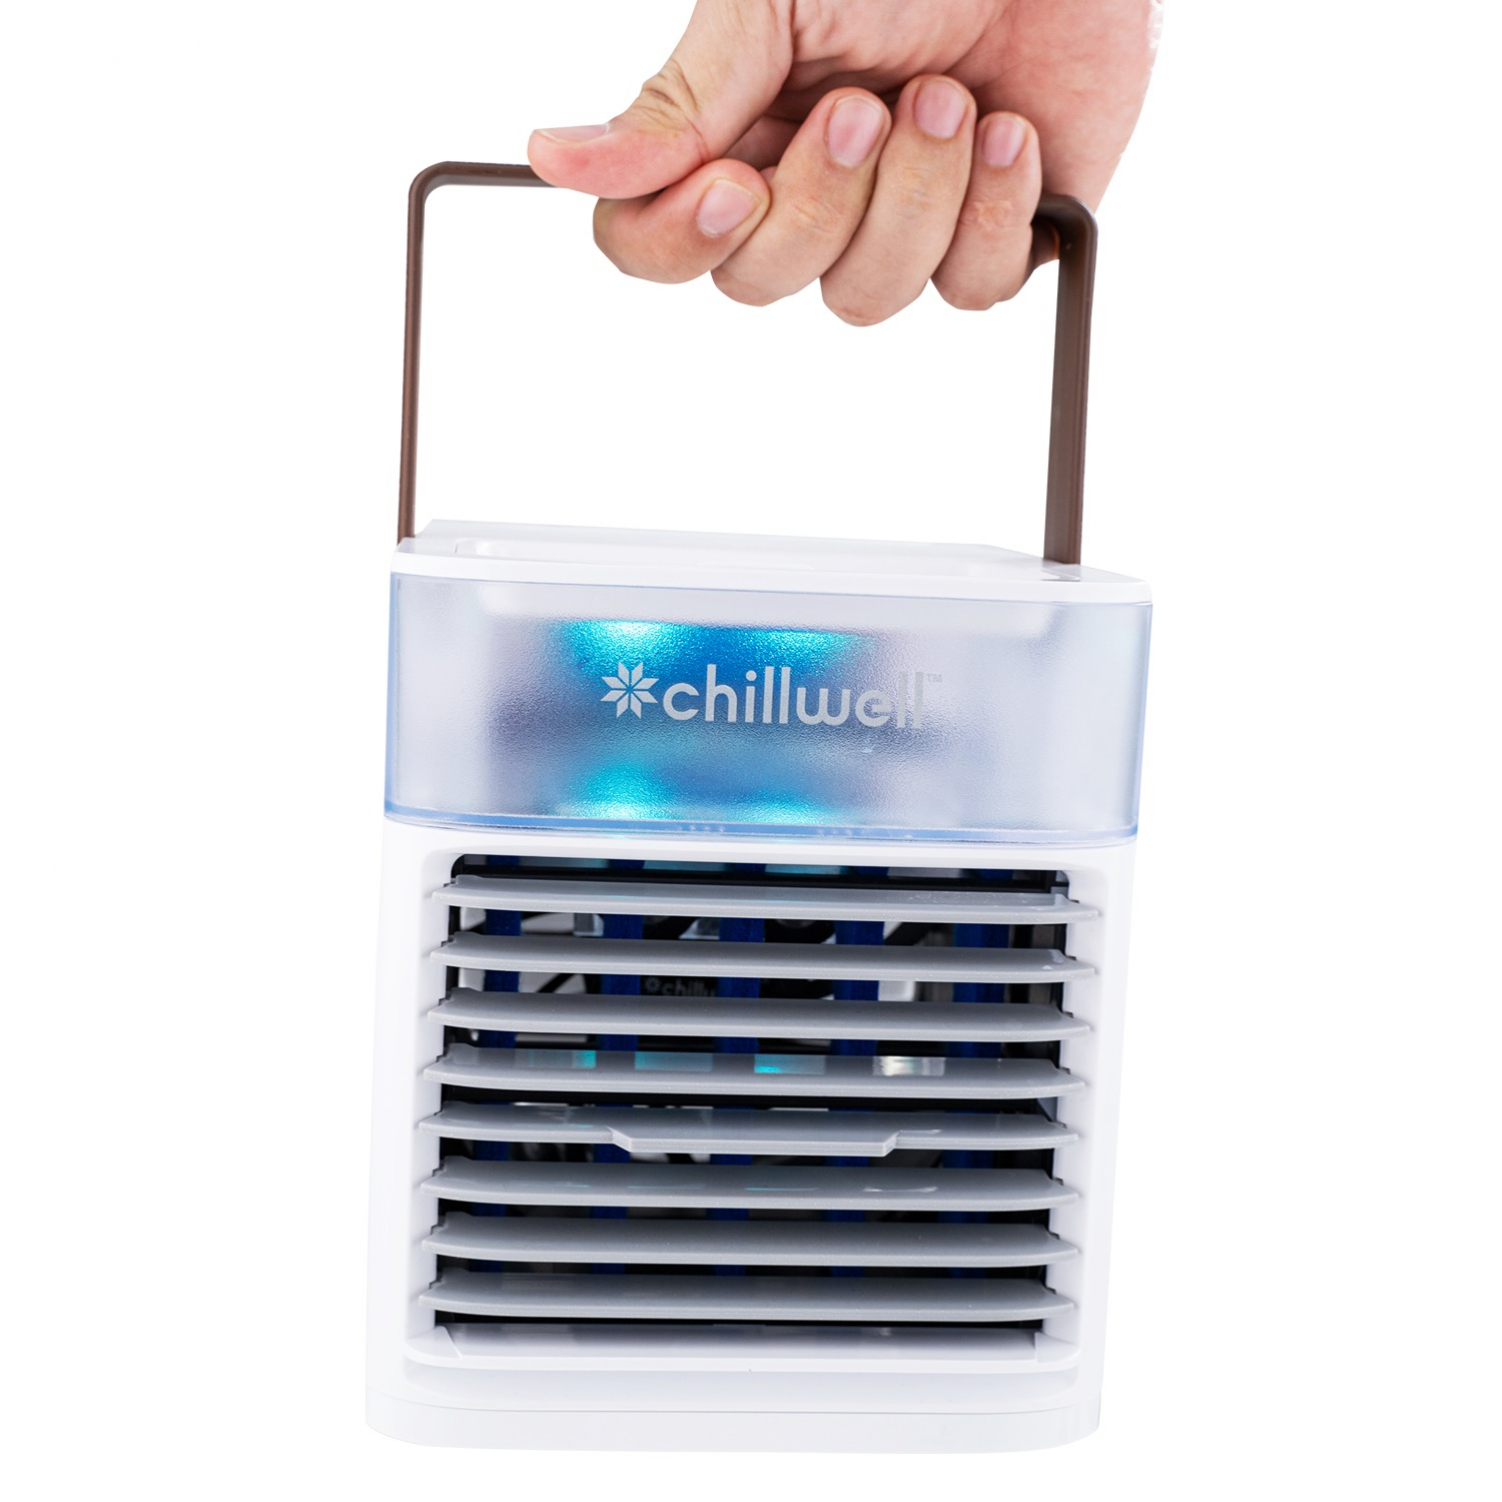 Chillwell AC Buy One Get One